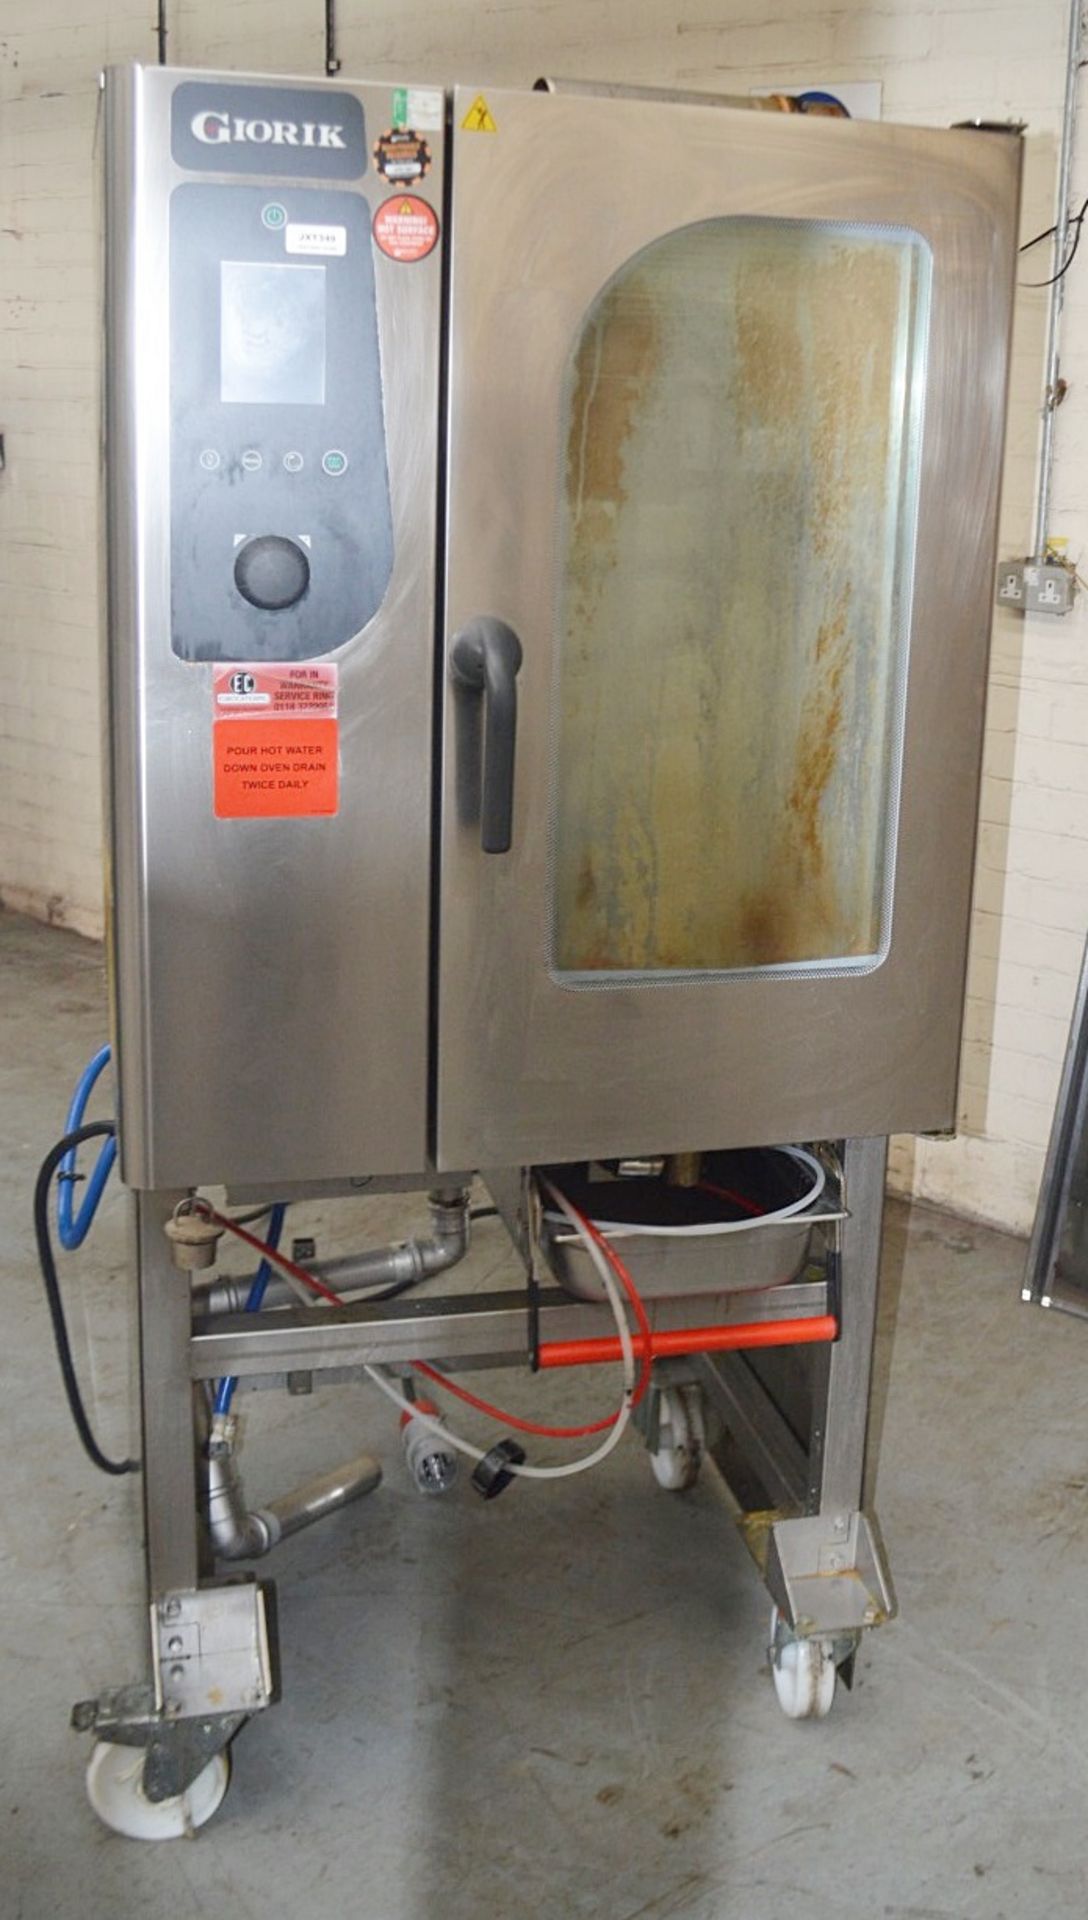 1 x BKI Giorik Commercial Electric 10-grid Combination Oven With 2-Sided Access On Large Mobile